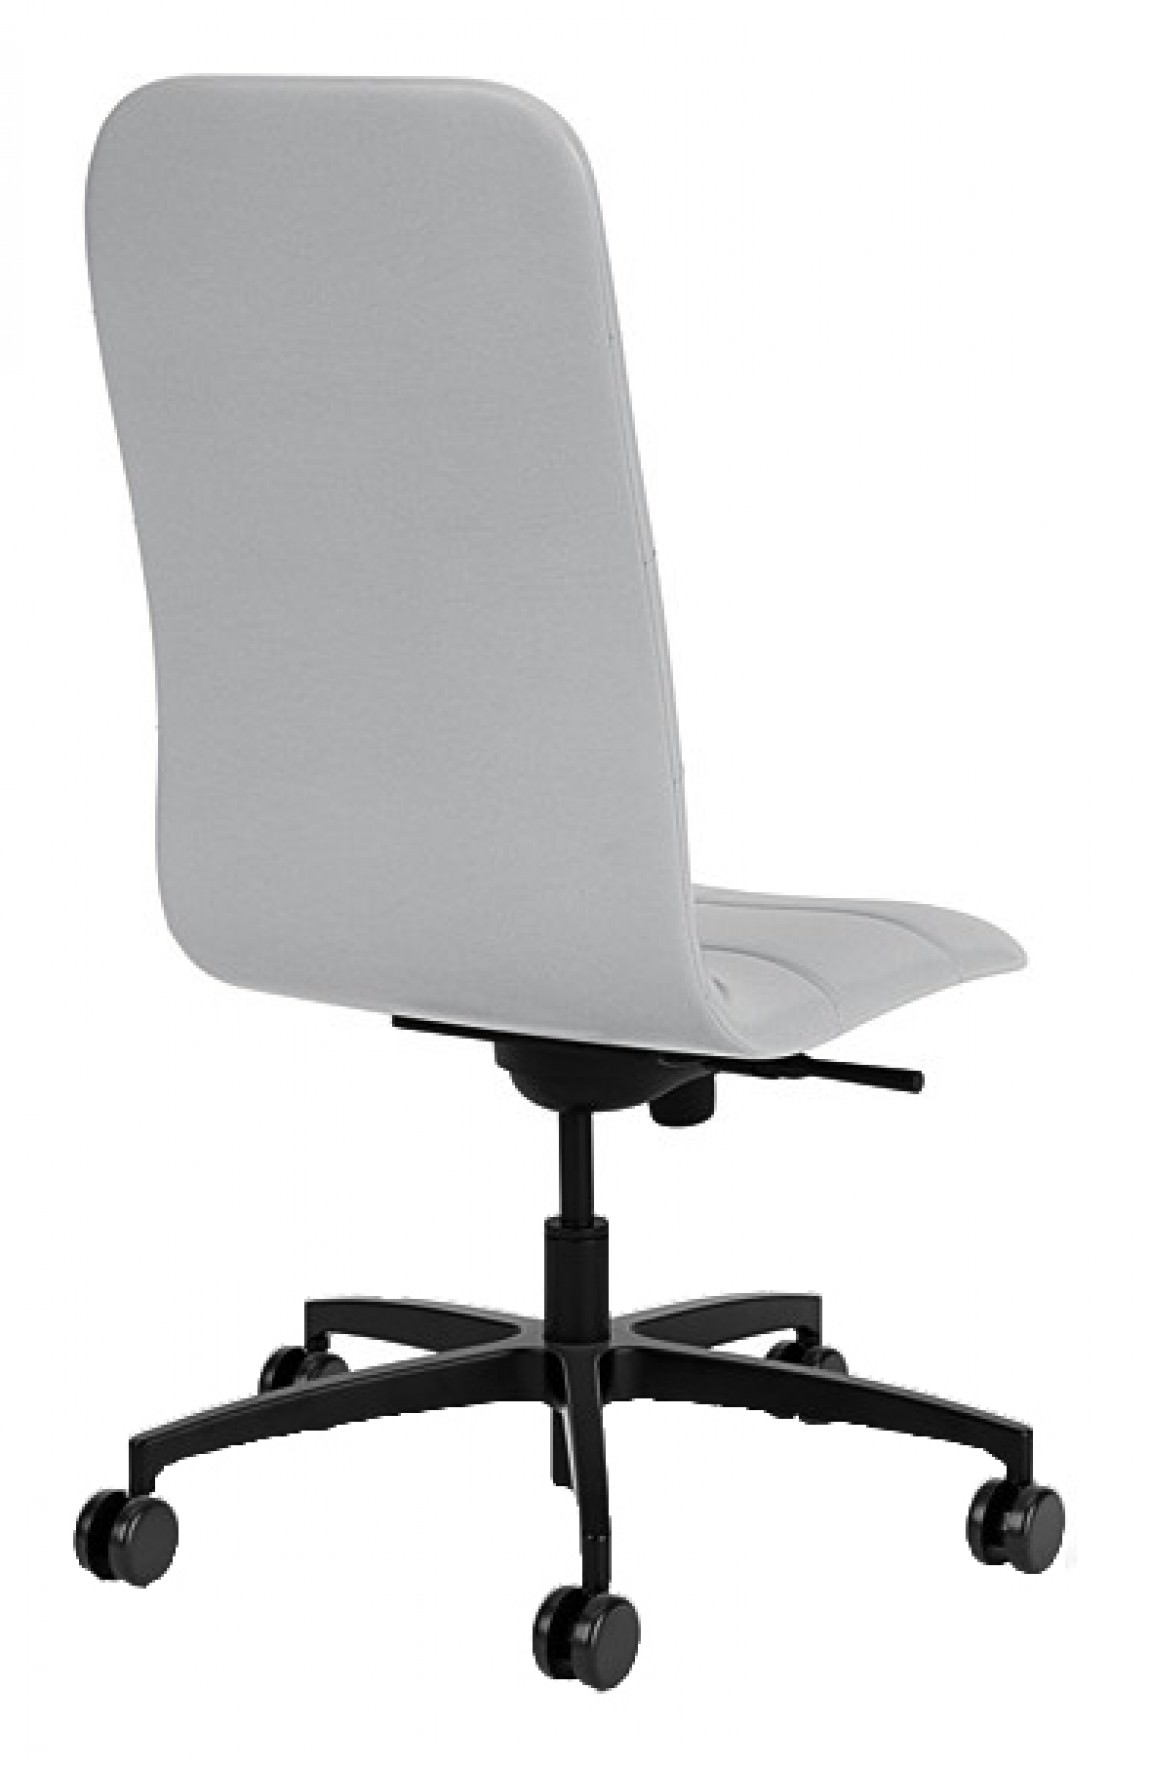 Mid Back Conference Chair with No Arms